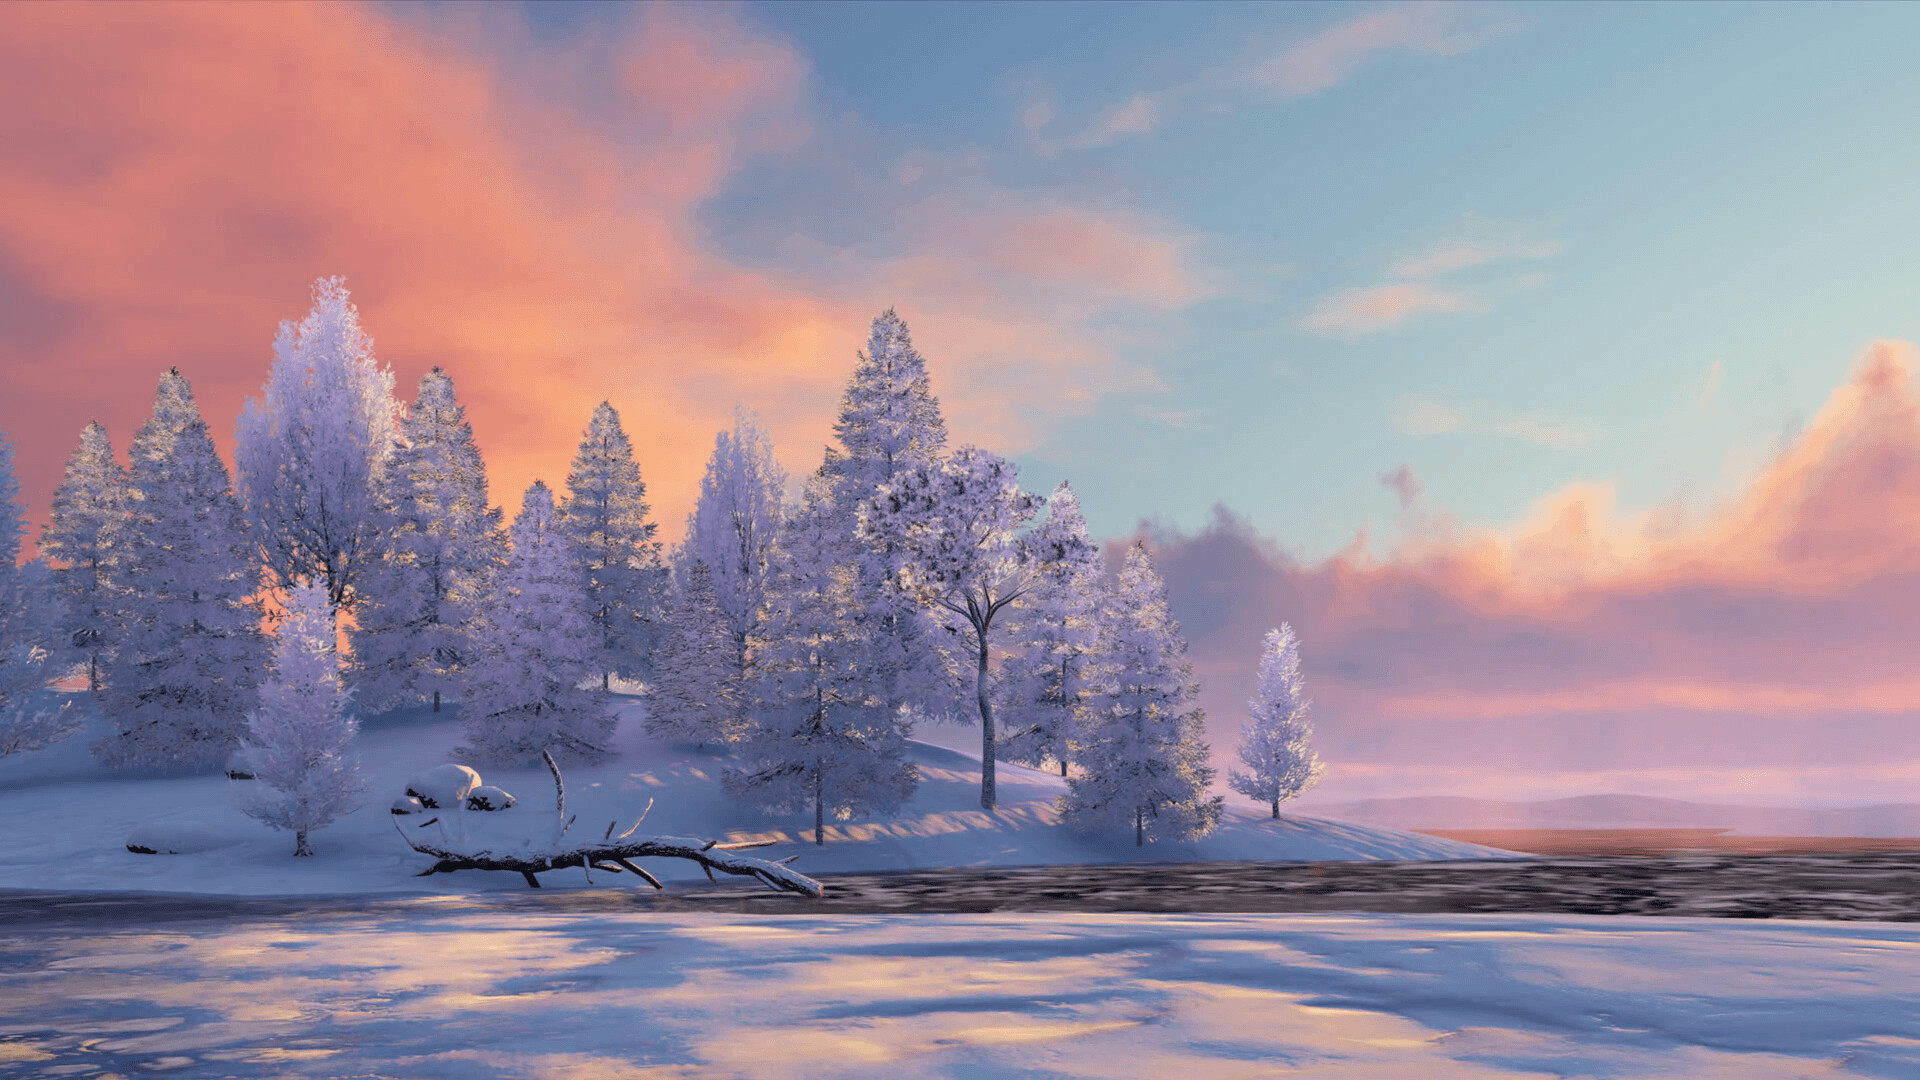 Winter: A wide expanse of snow, Seasonal changes, Icy-cold. 1920x1080 Full HD Wallpaper.